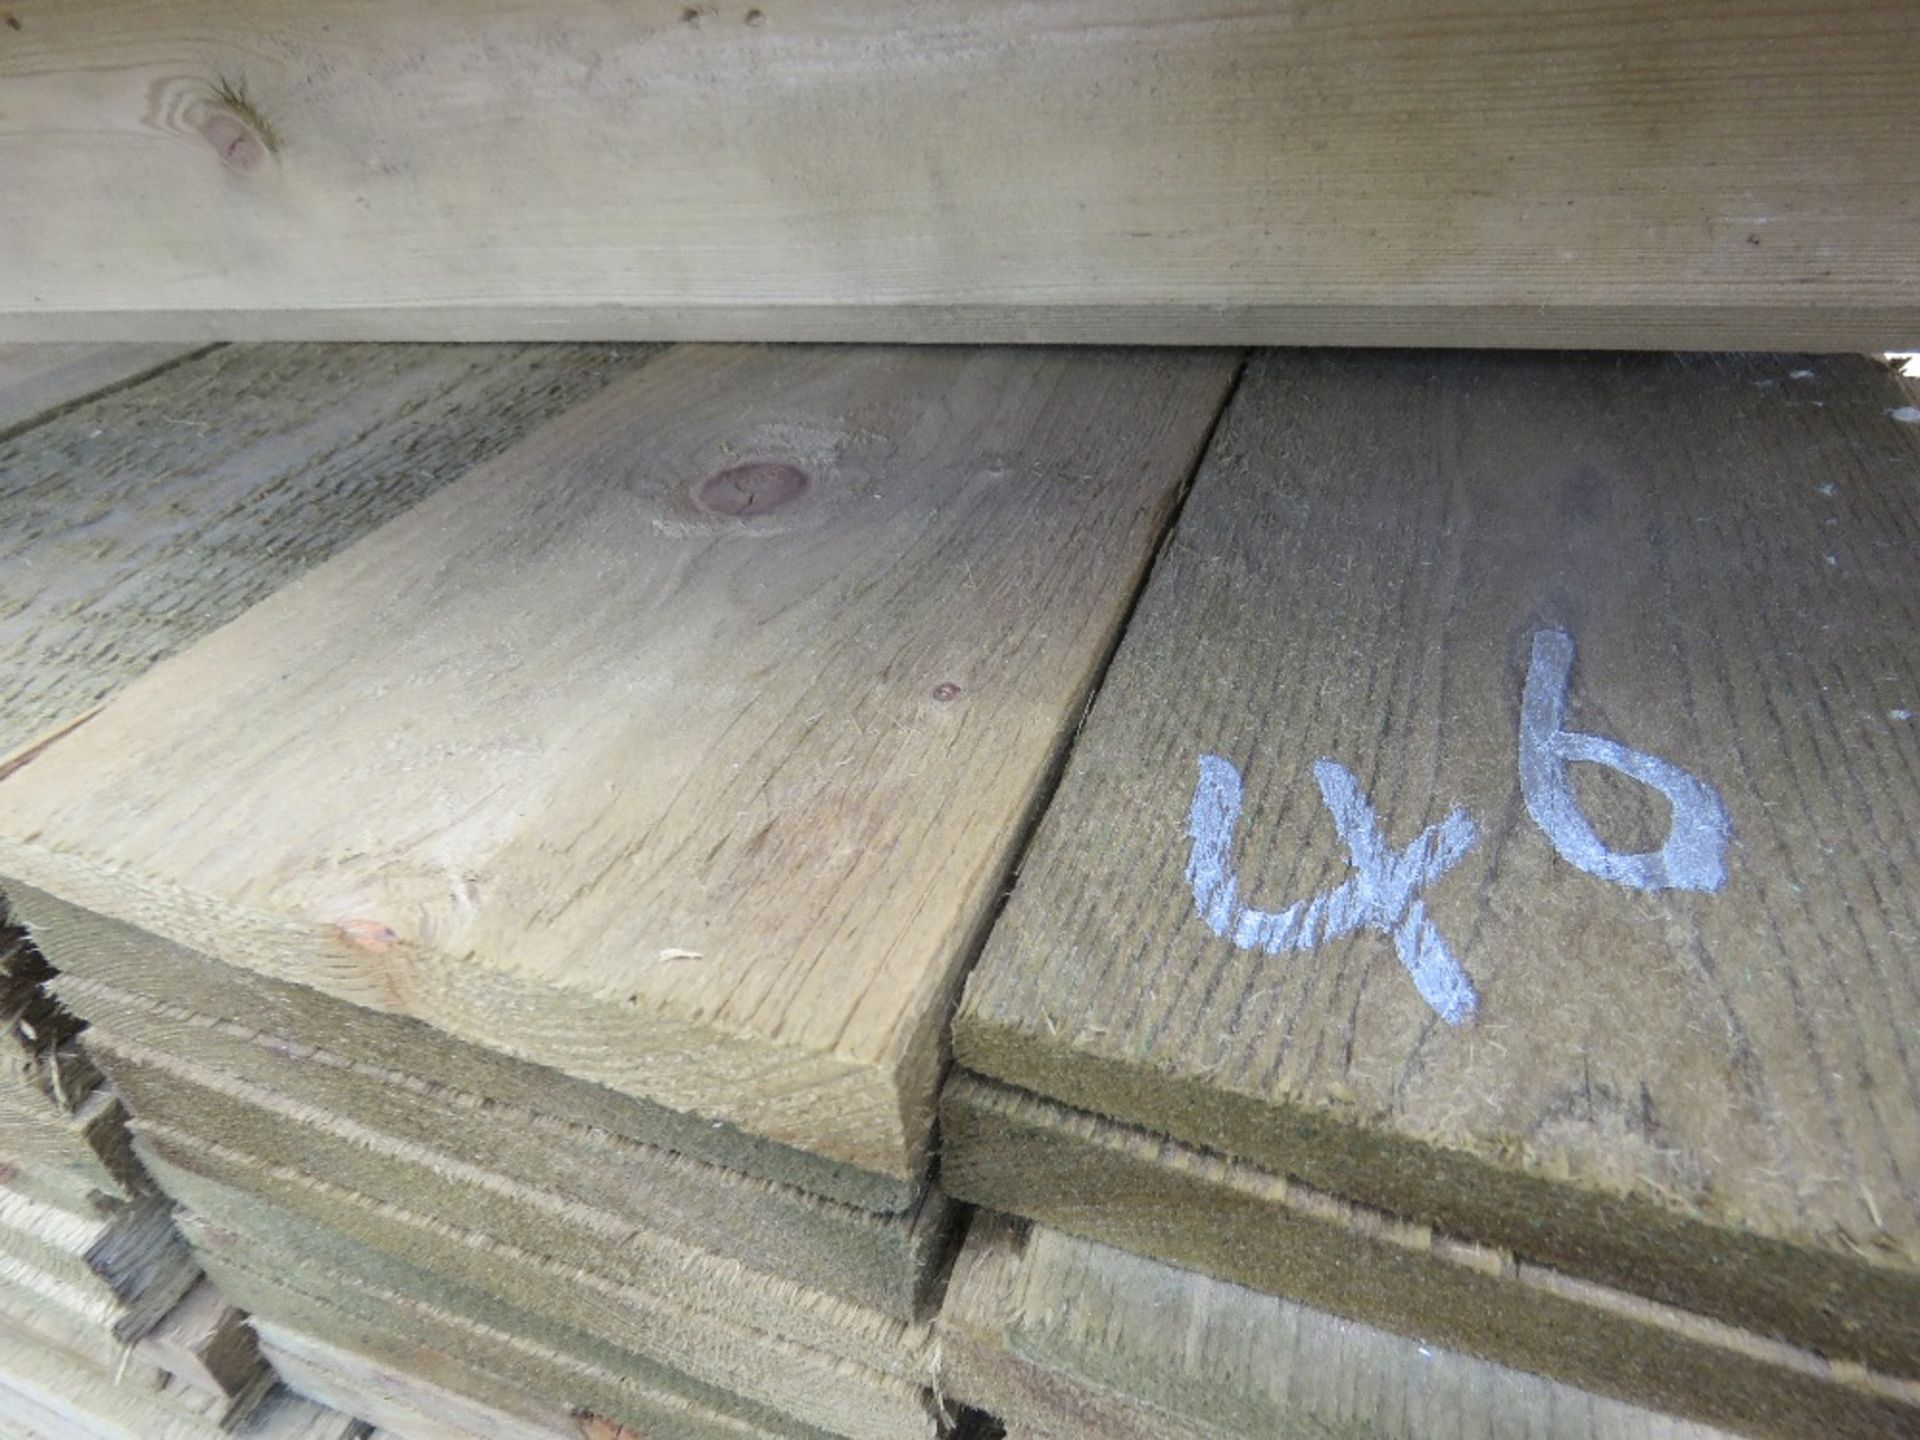 LARGE PACK OF FEATHER EDGE CLADDING TIMBER 1.8M X 10CM APPROX, PRESSURE TREATED. - Image 3 of 3